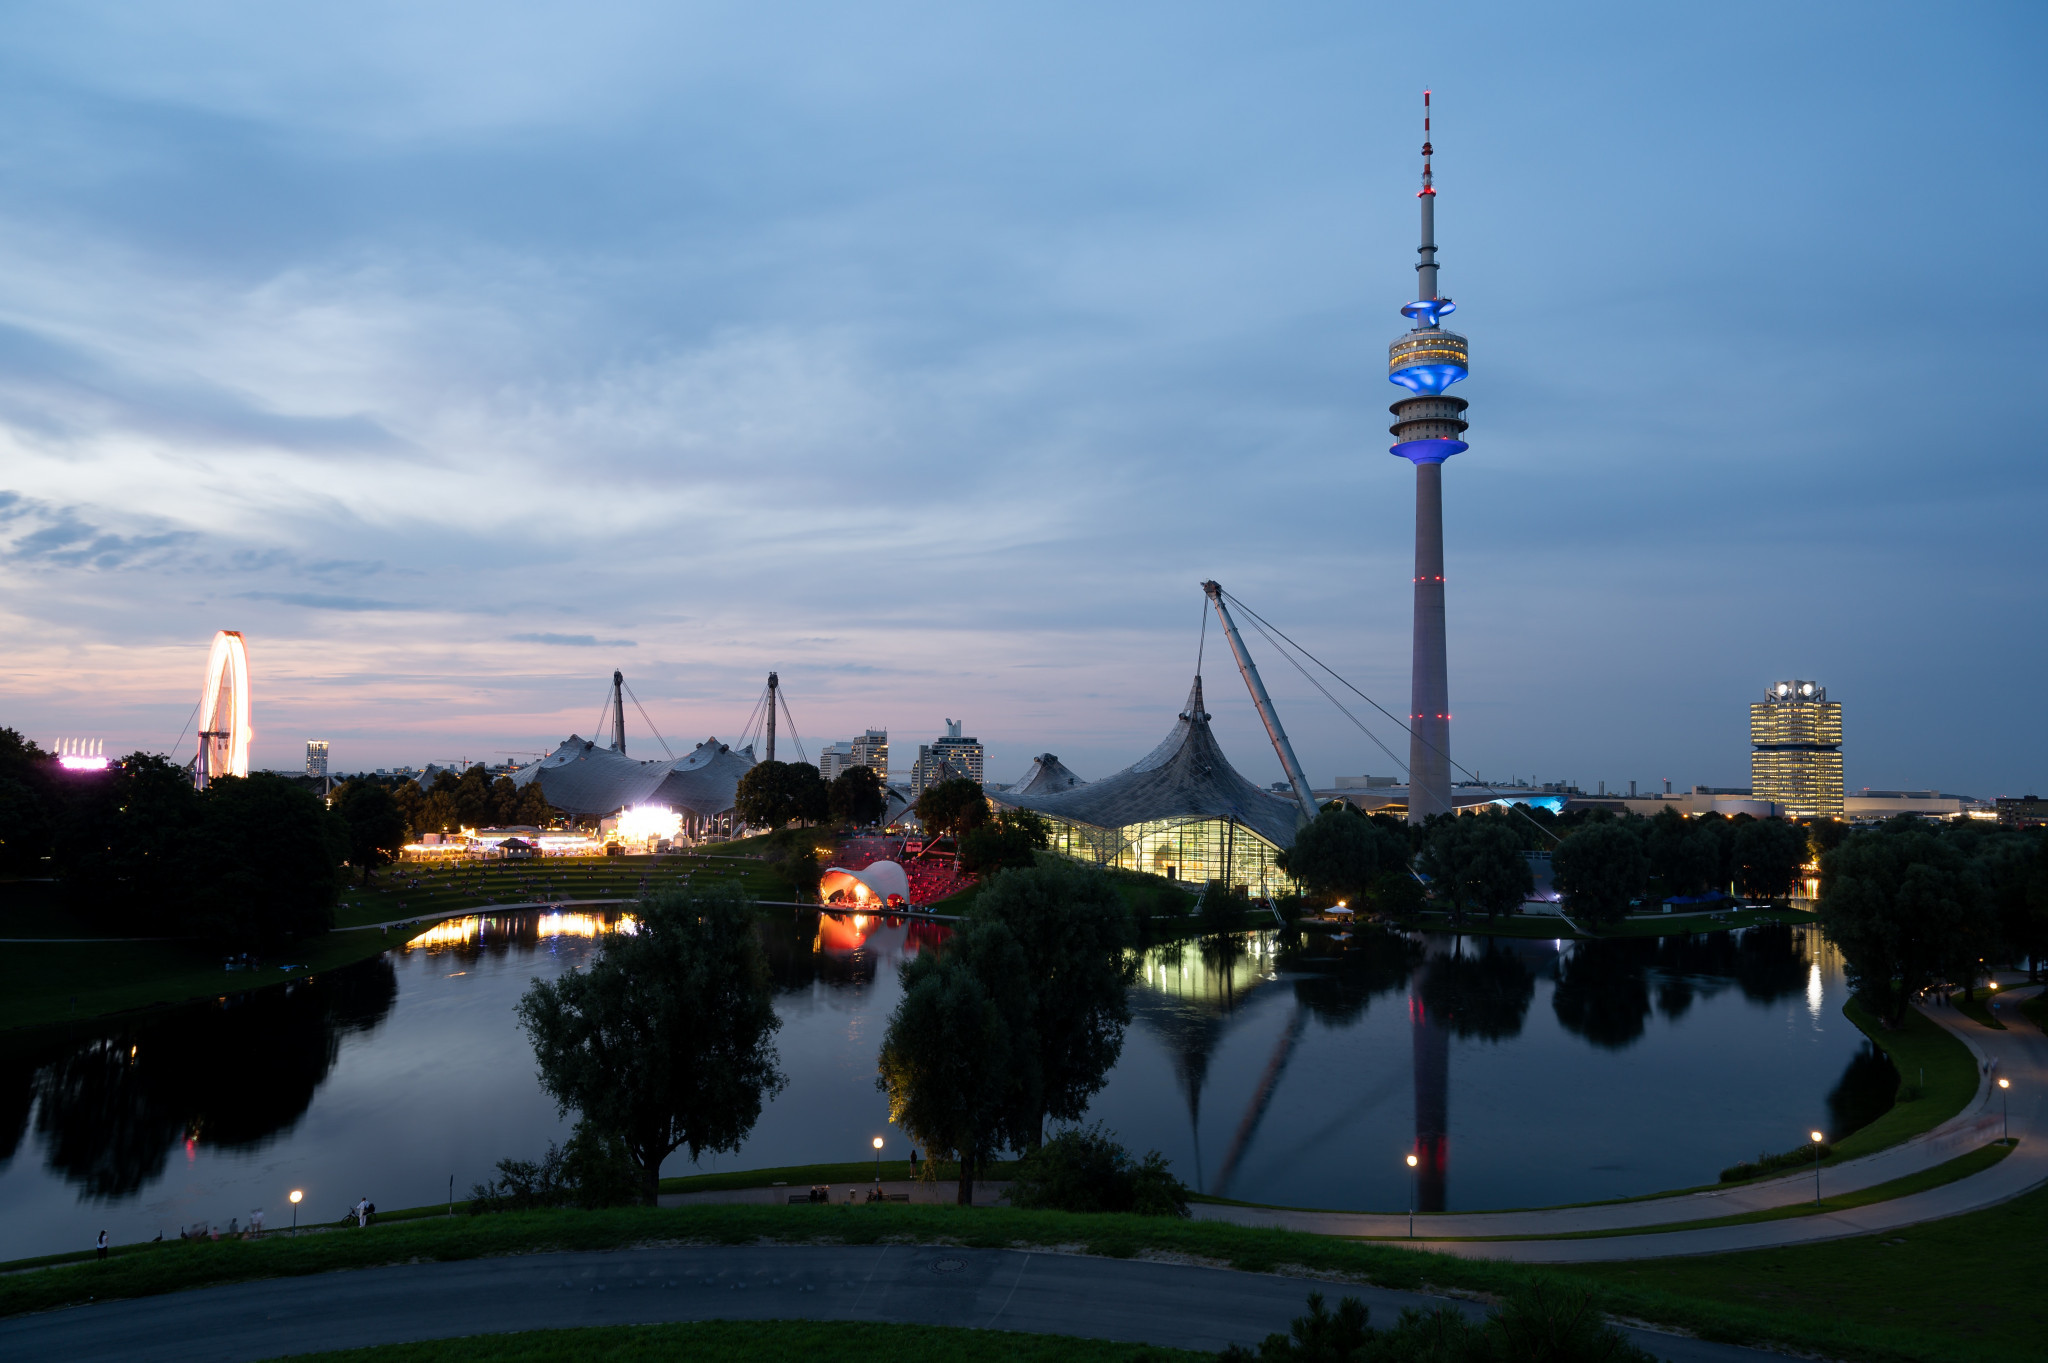 Munich’s Olympic Tower to be revamped after 2022 European Championships